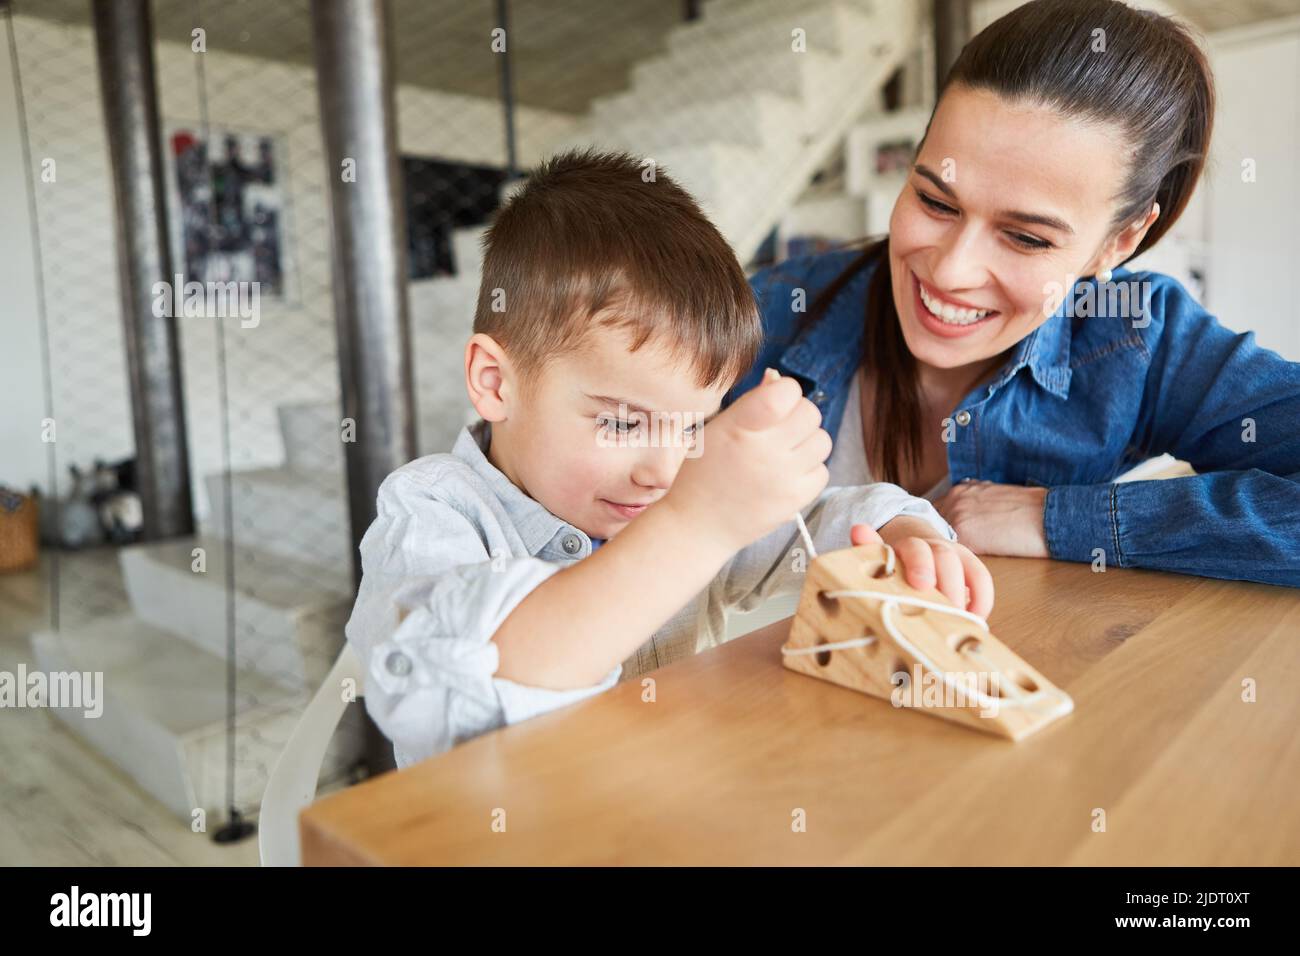 Mother watches her son threading a string on a wooden toy Stock Photo